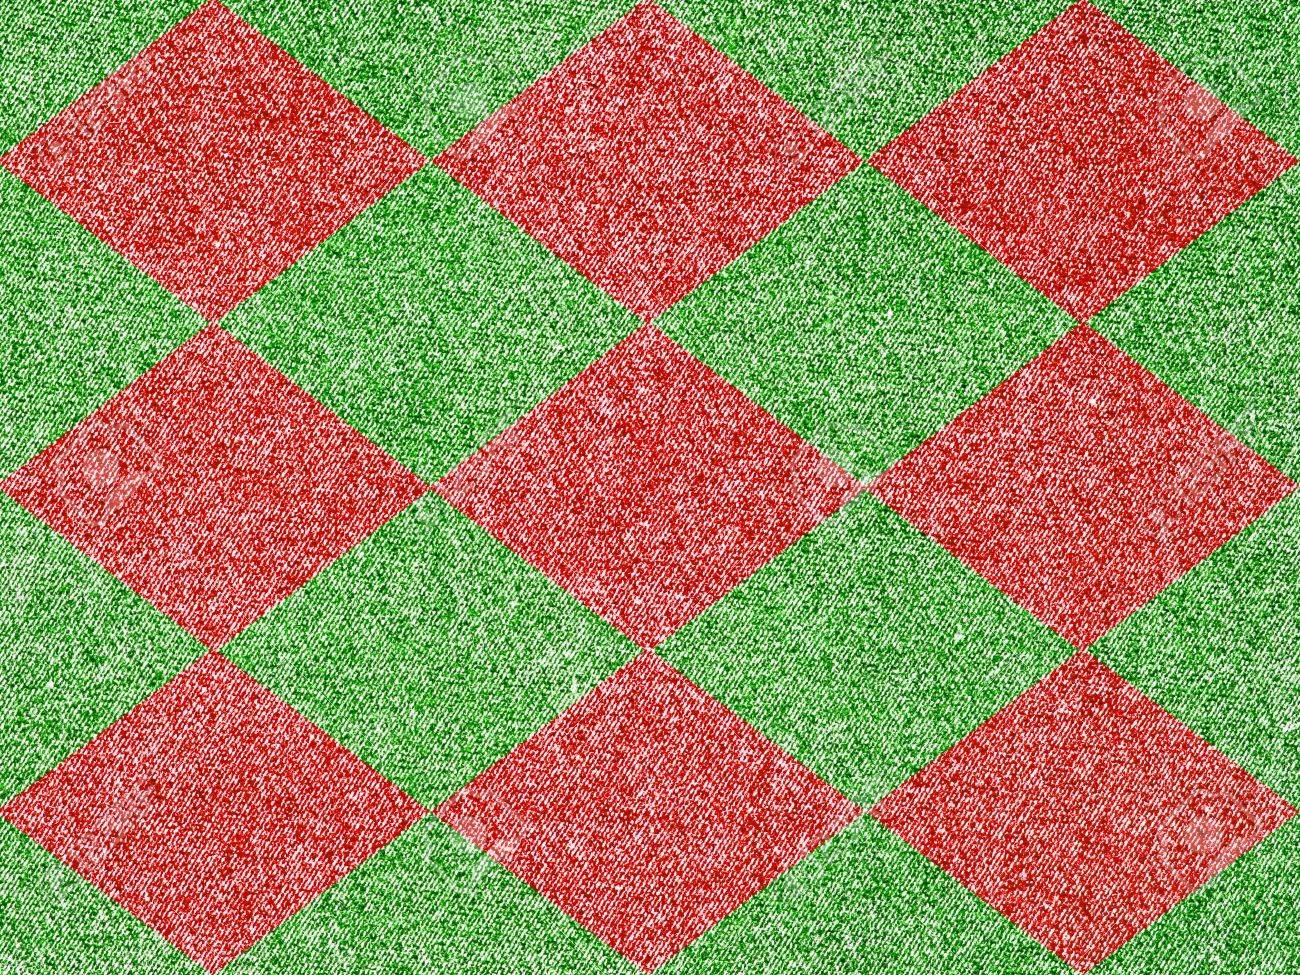 8275191-denim-fabric-in-christmas-colors-forming-a-checkered-pattern.jpg